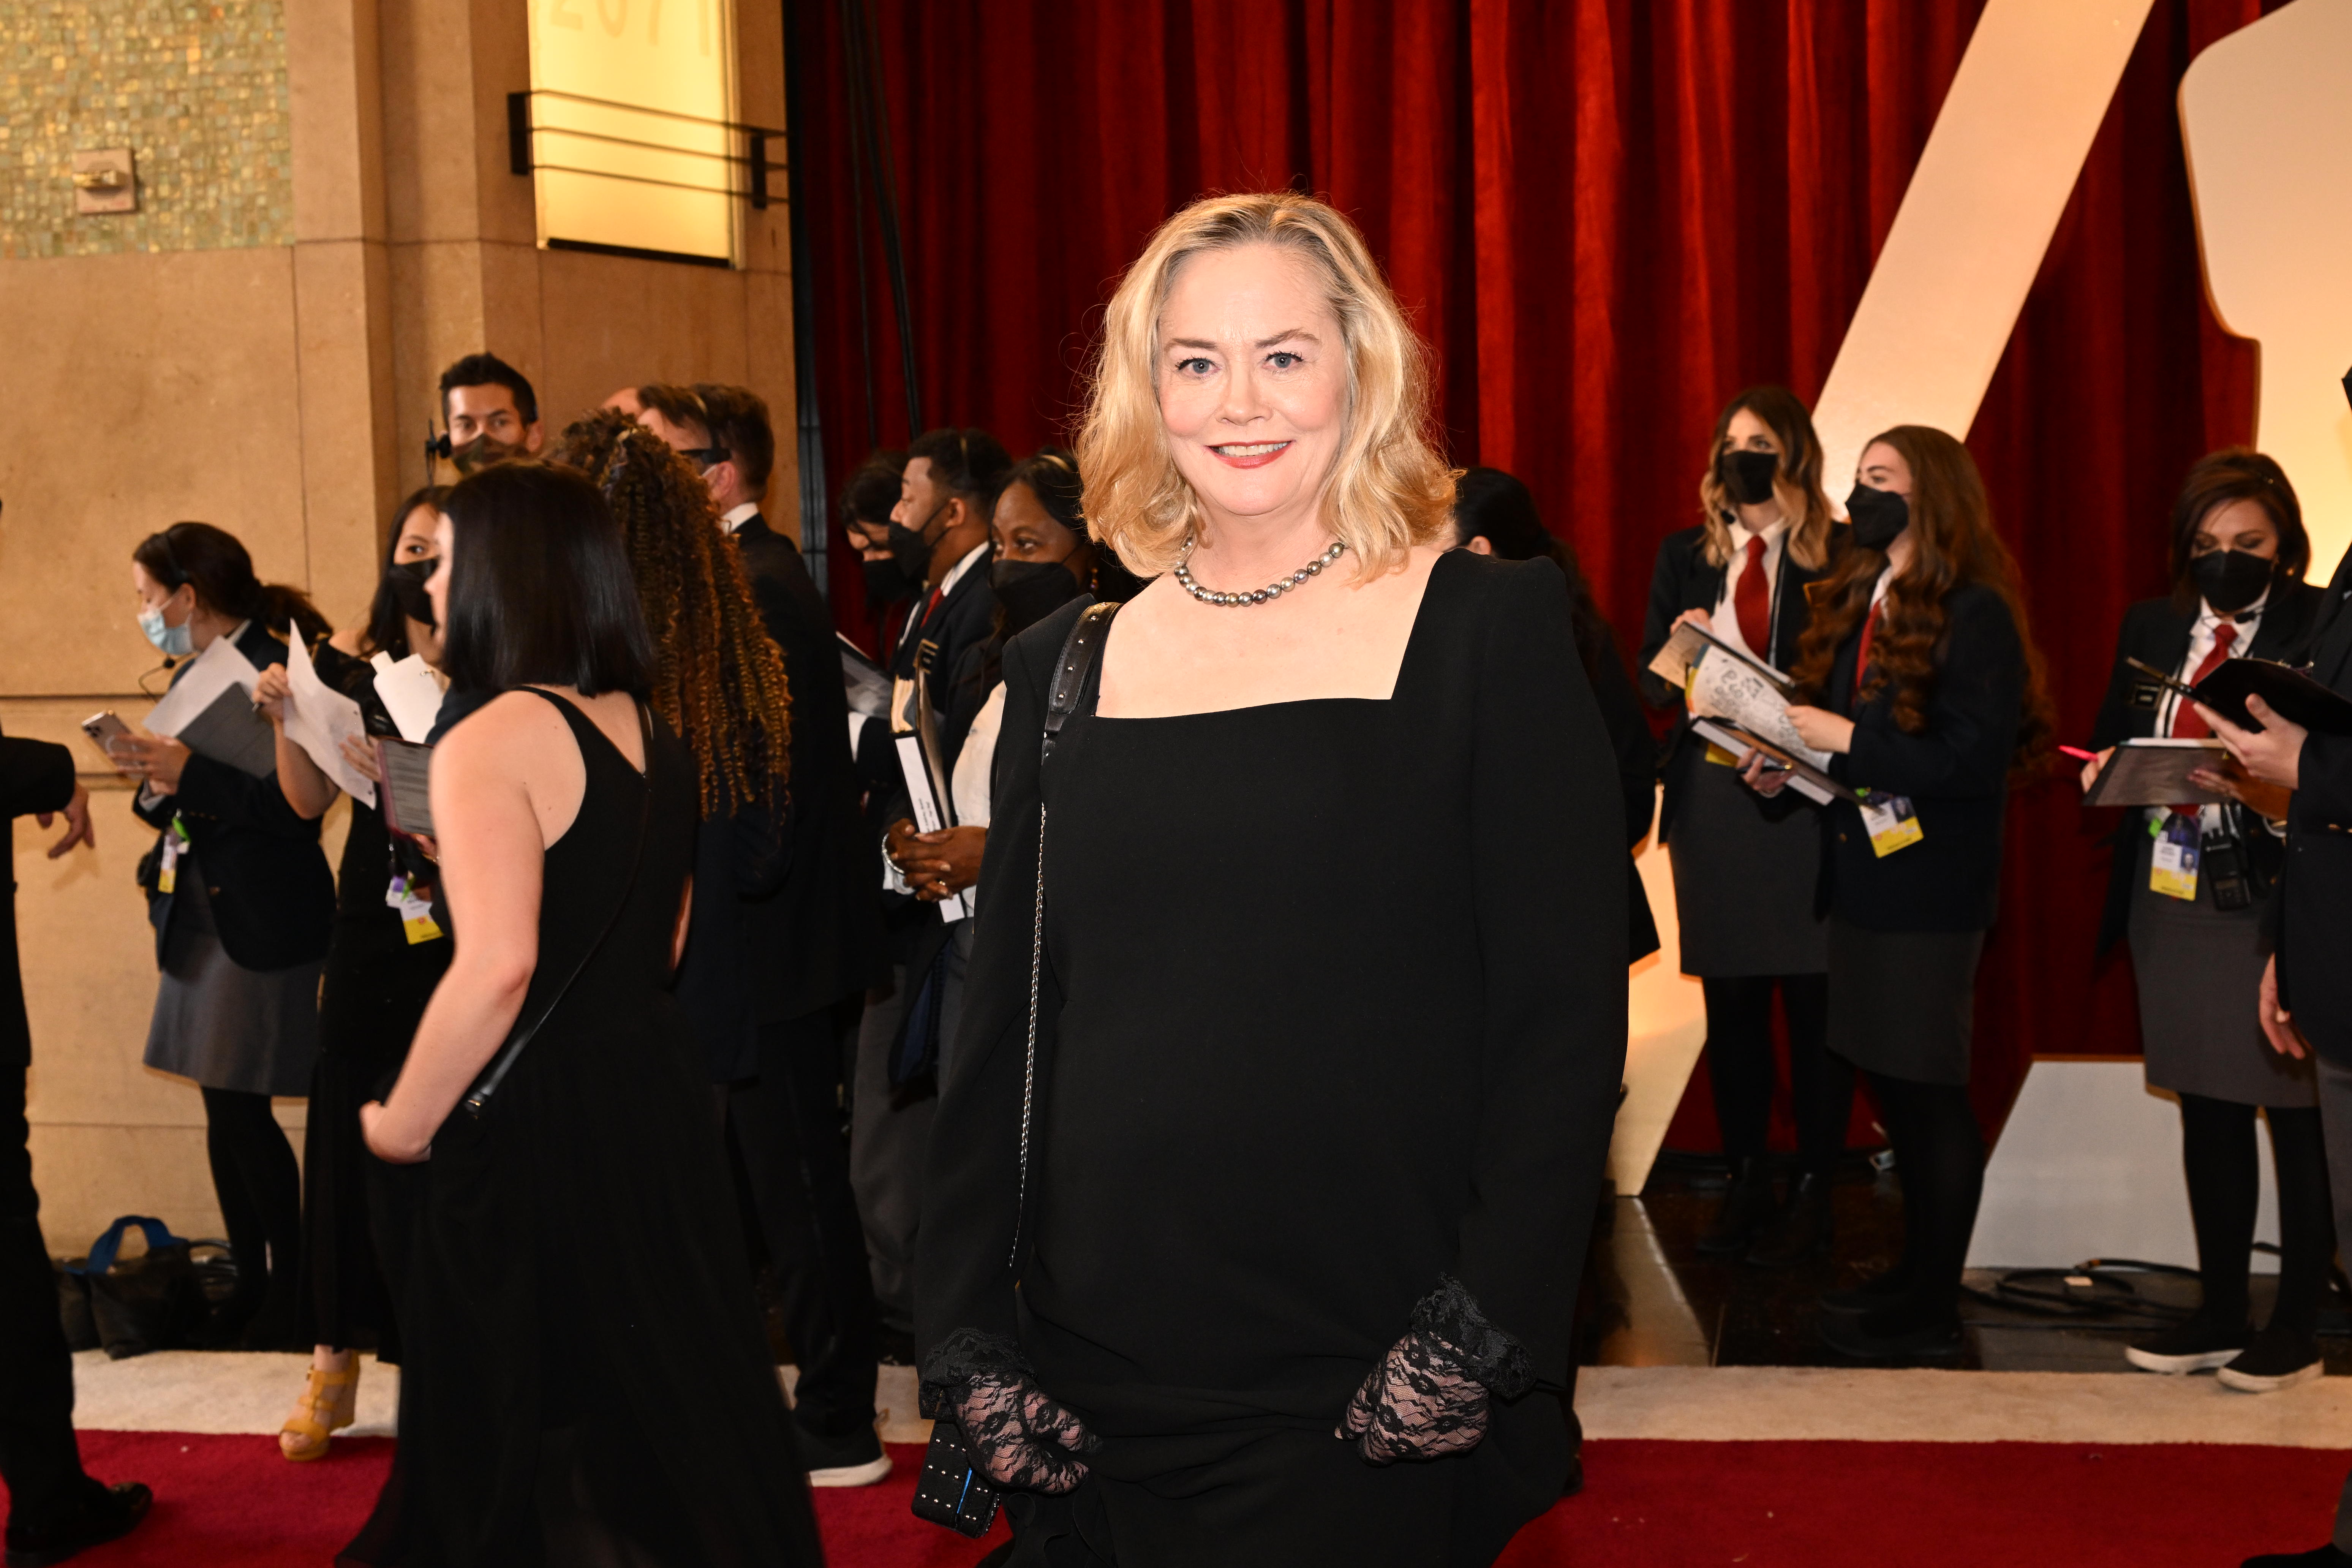 Cybill Shepherd at the 94th Academy Awards on March 27, 2022, in Los Angeles, California. | Source: Getty Images